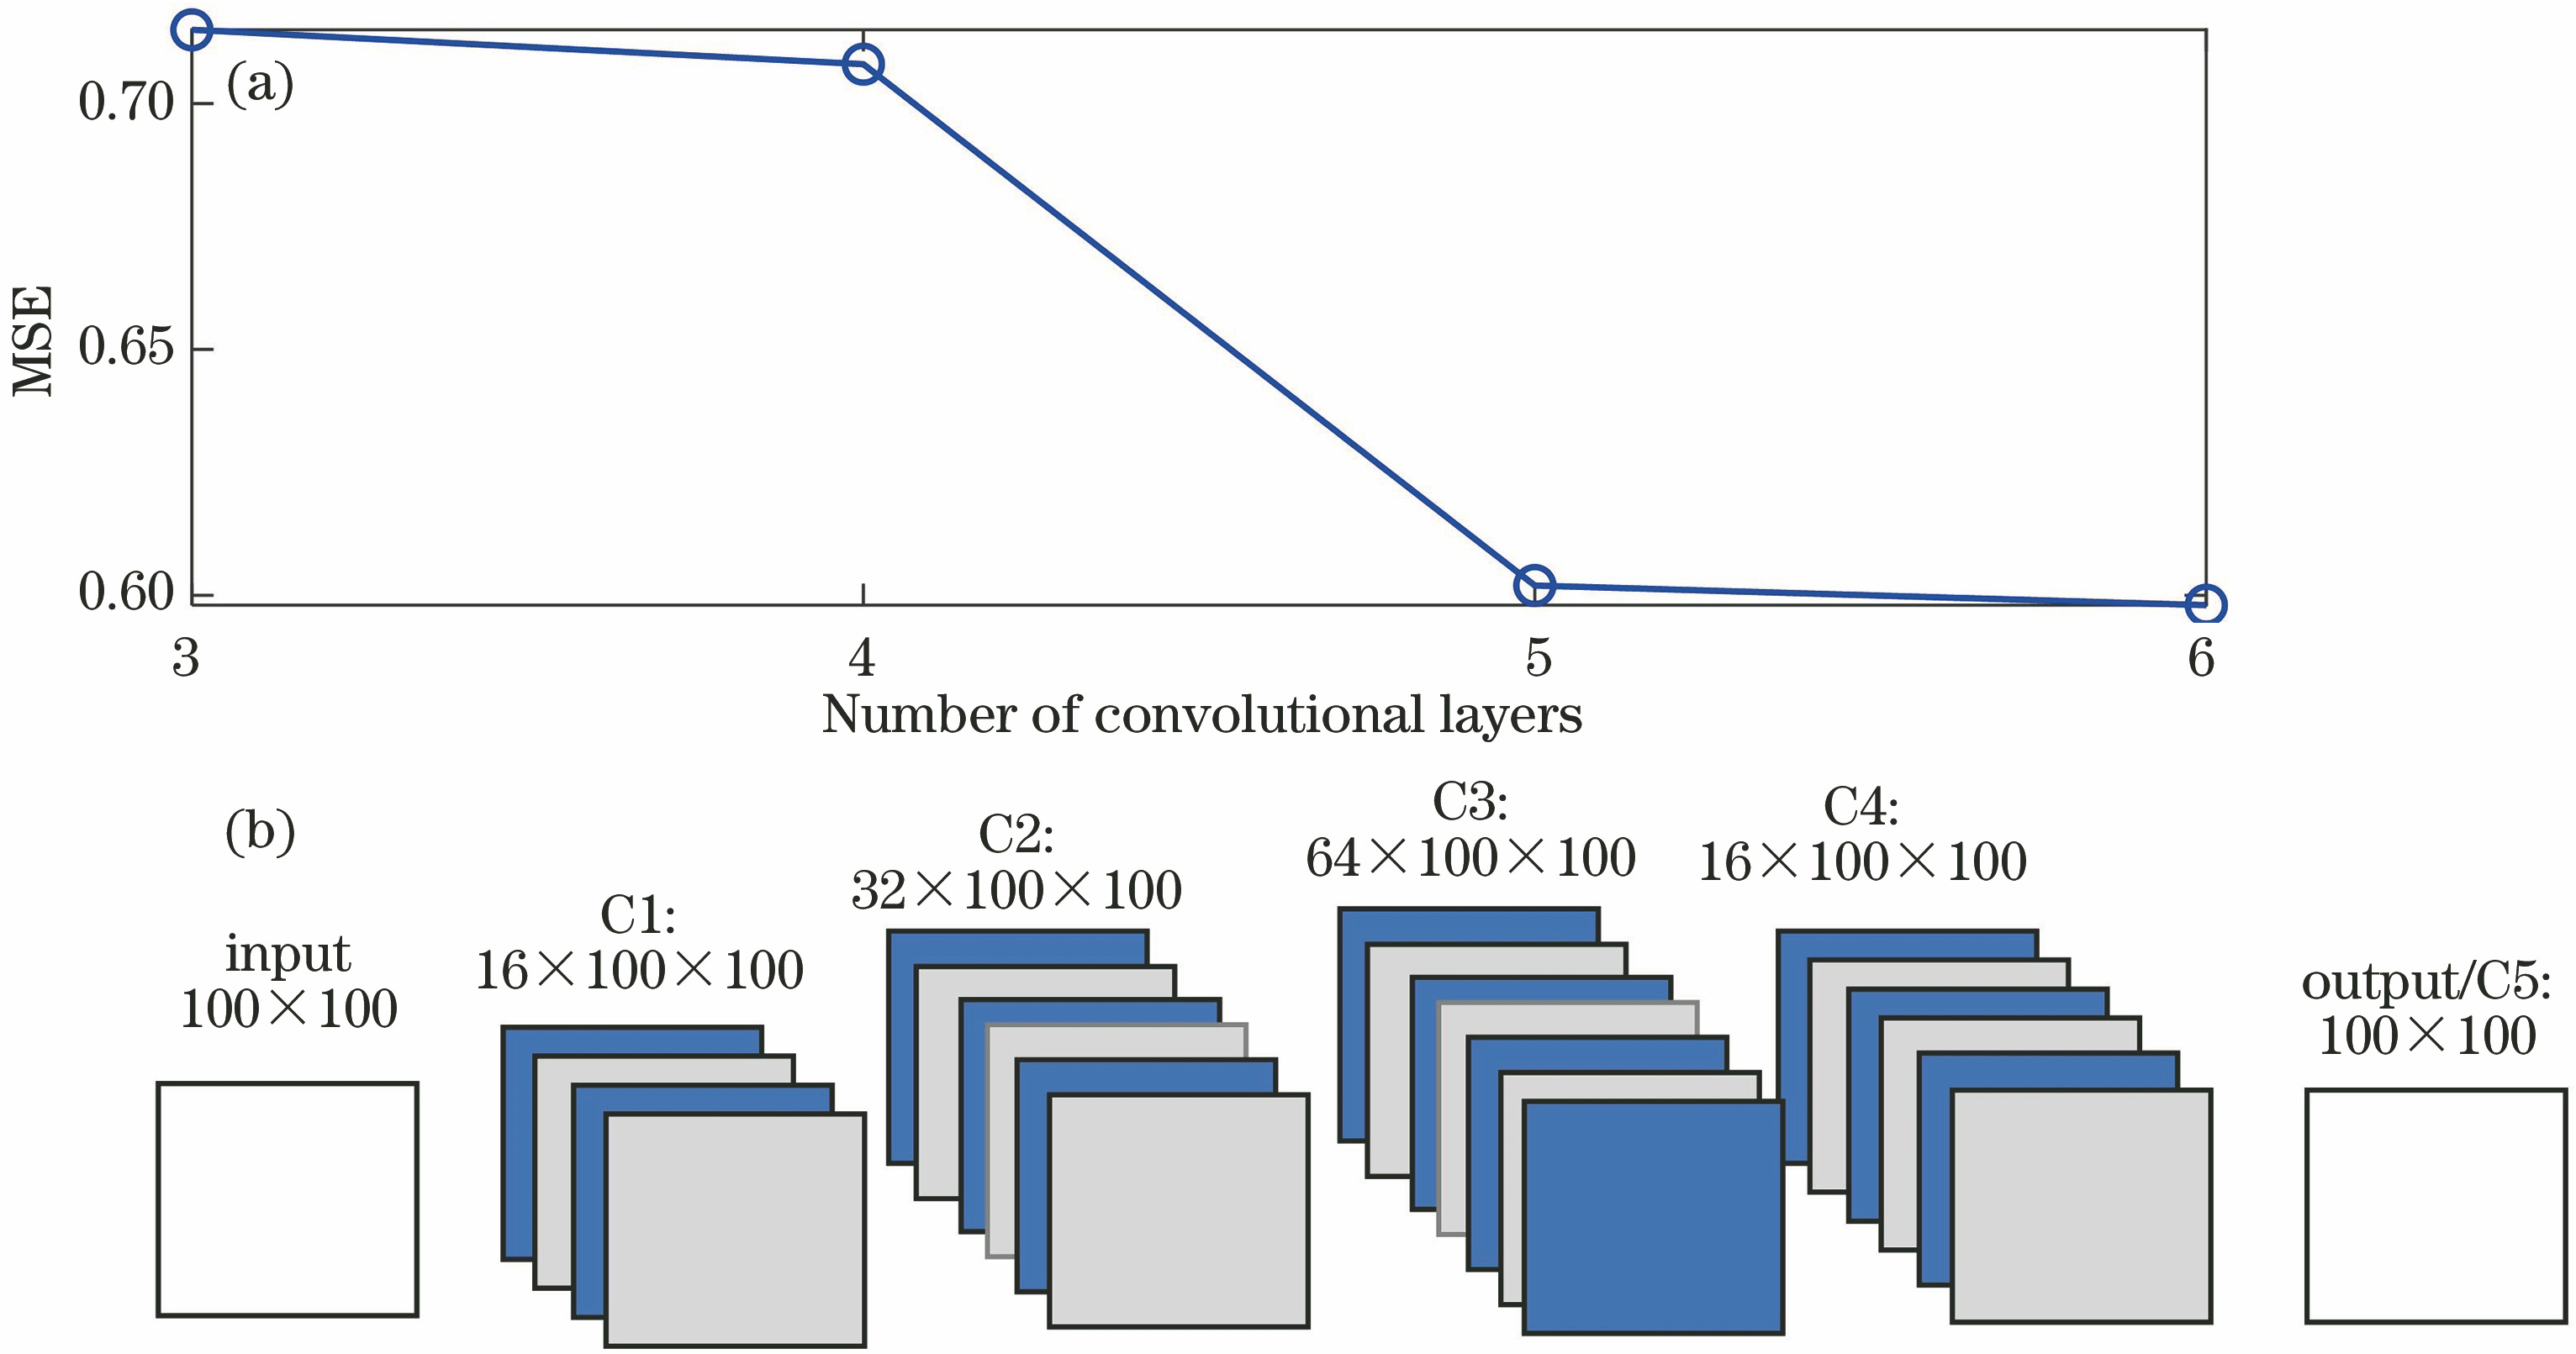 Model selection of CNN. (a) MSE versus number of convolutional layers; (b) structural diagram of CNN